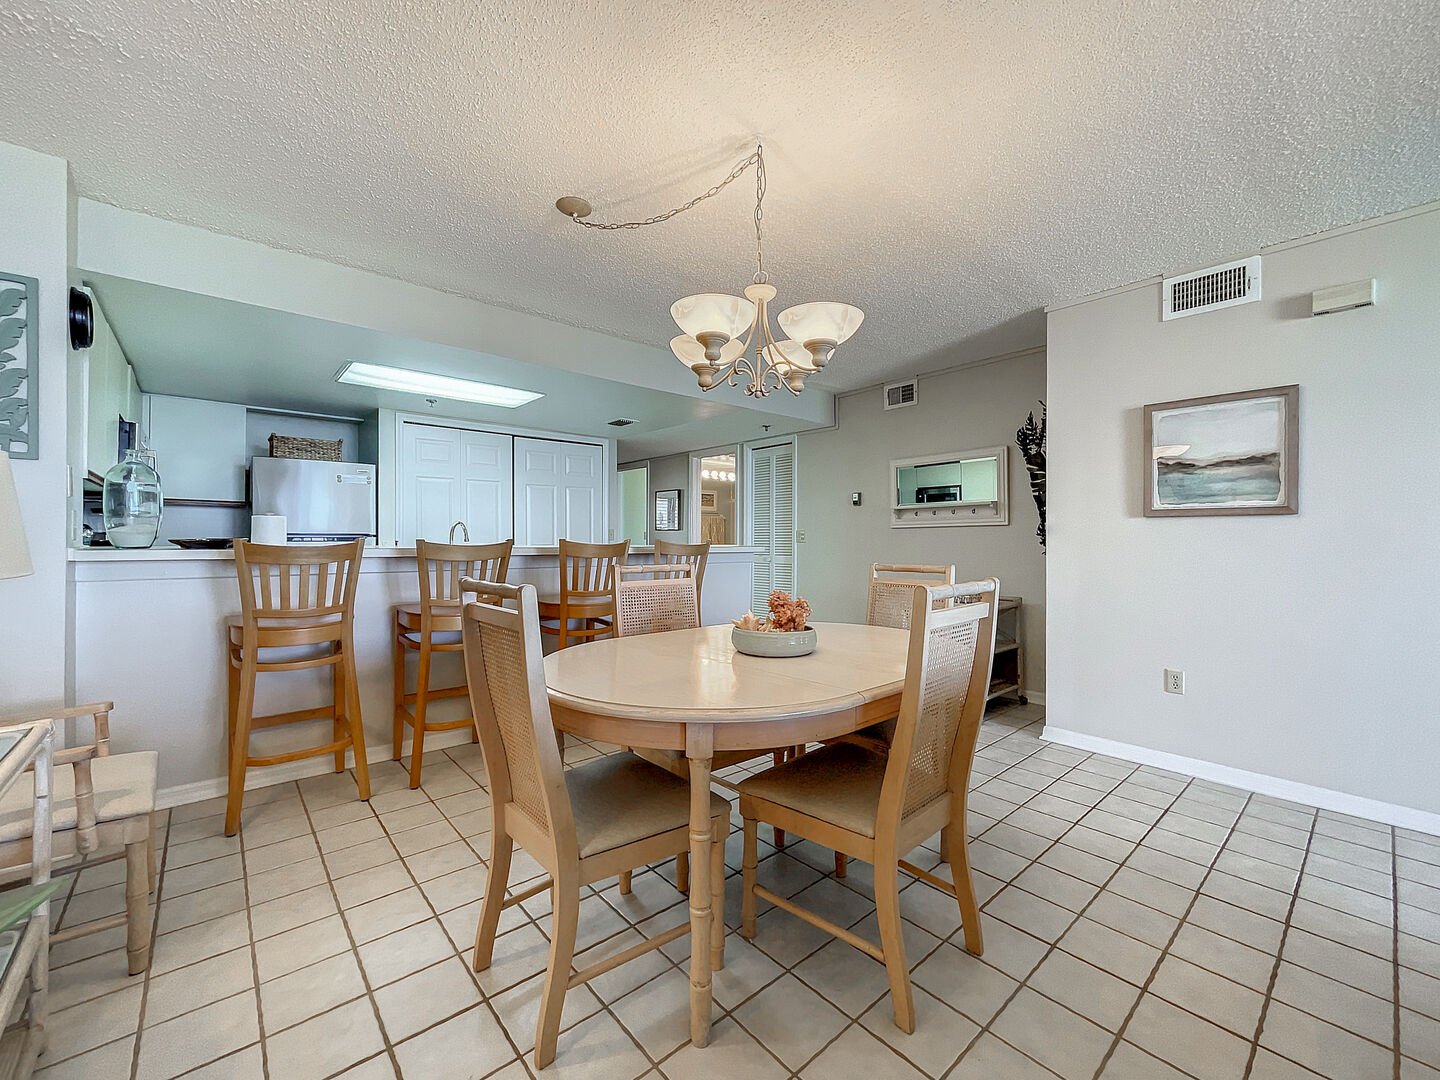 Appreciate mealtimes with family and friends in the ocean view dining room featuring seating for 4.